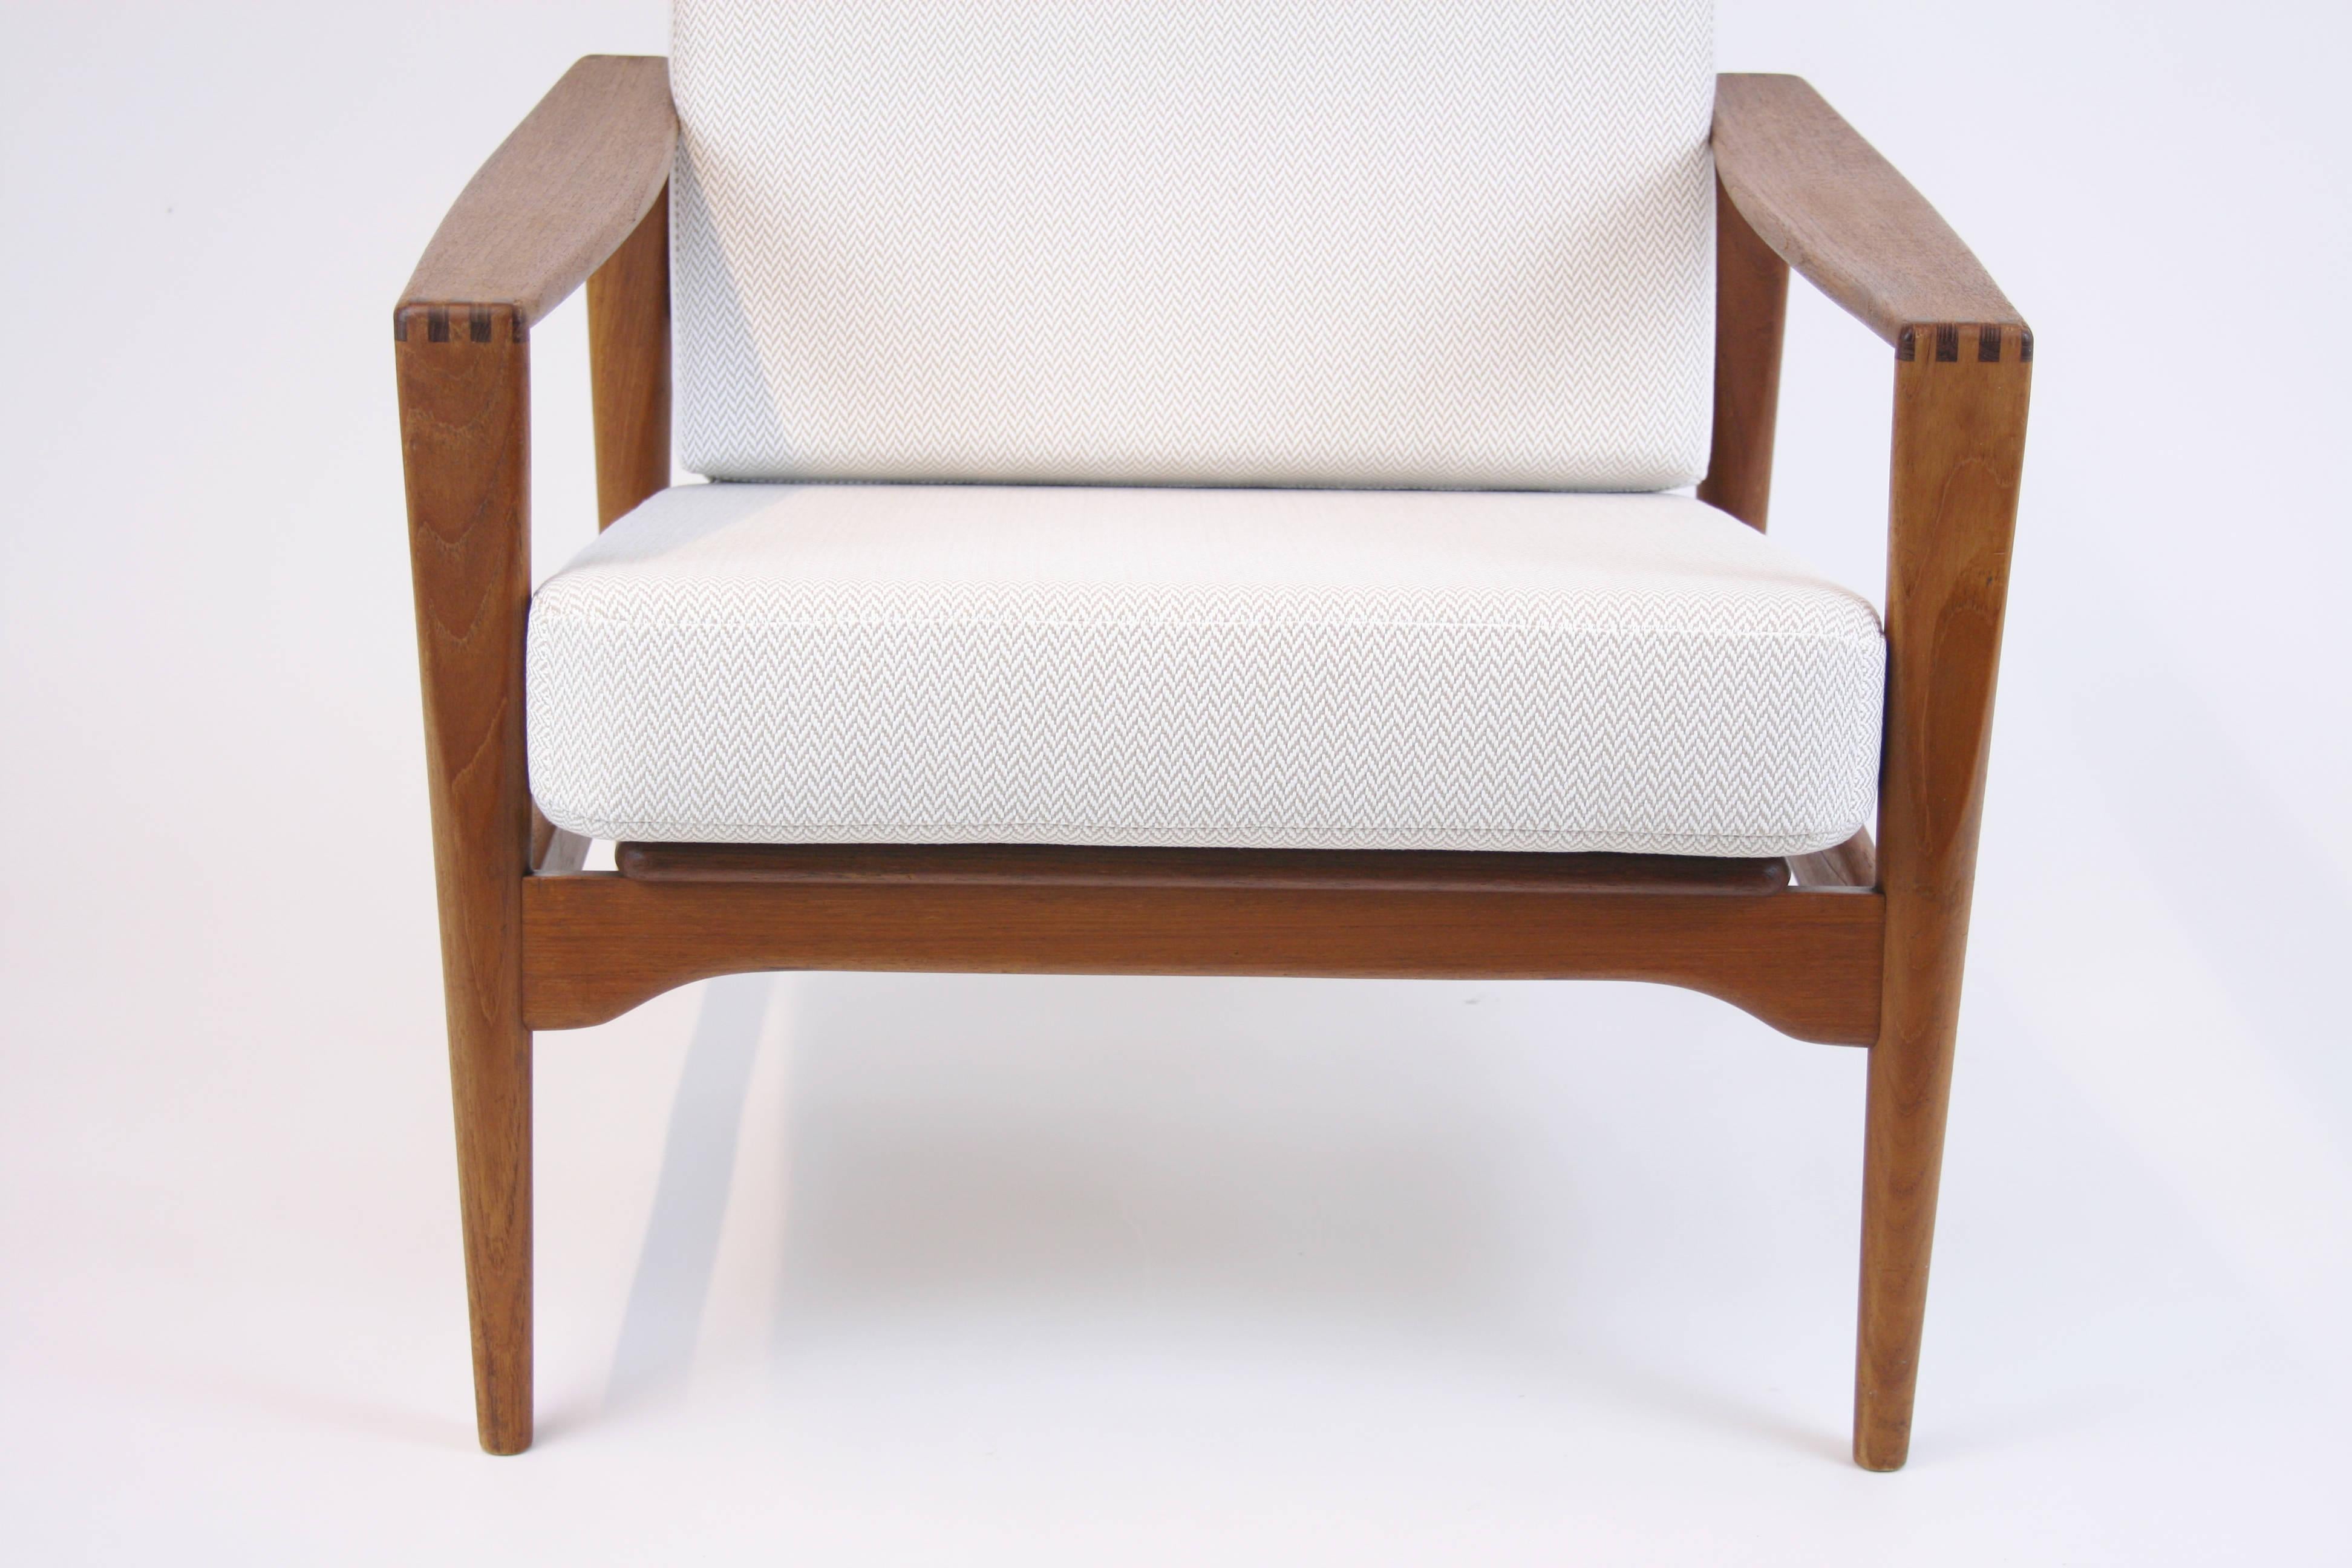 Upholstery Armchair Lounge Chair by Arne Wahl Iversen Original Design, Denmark, 1960s For Sale